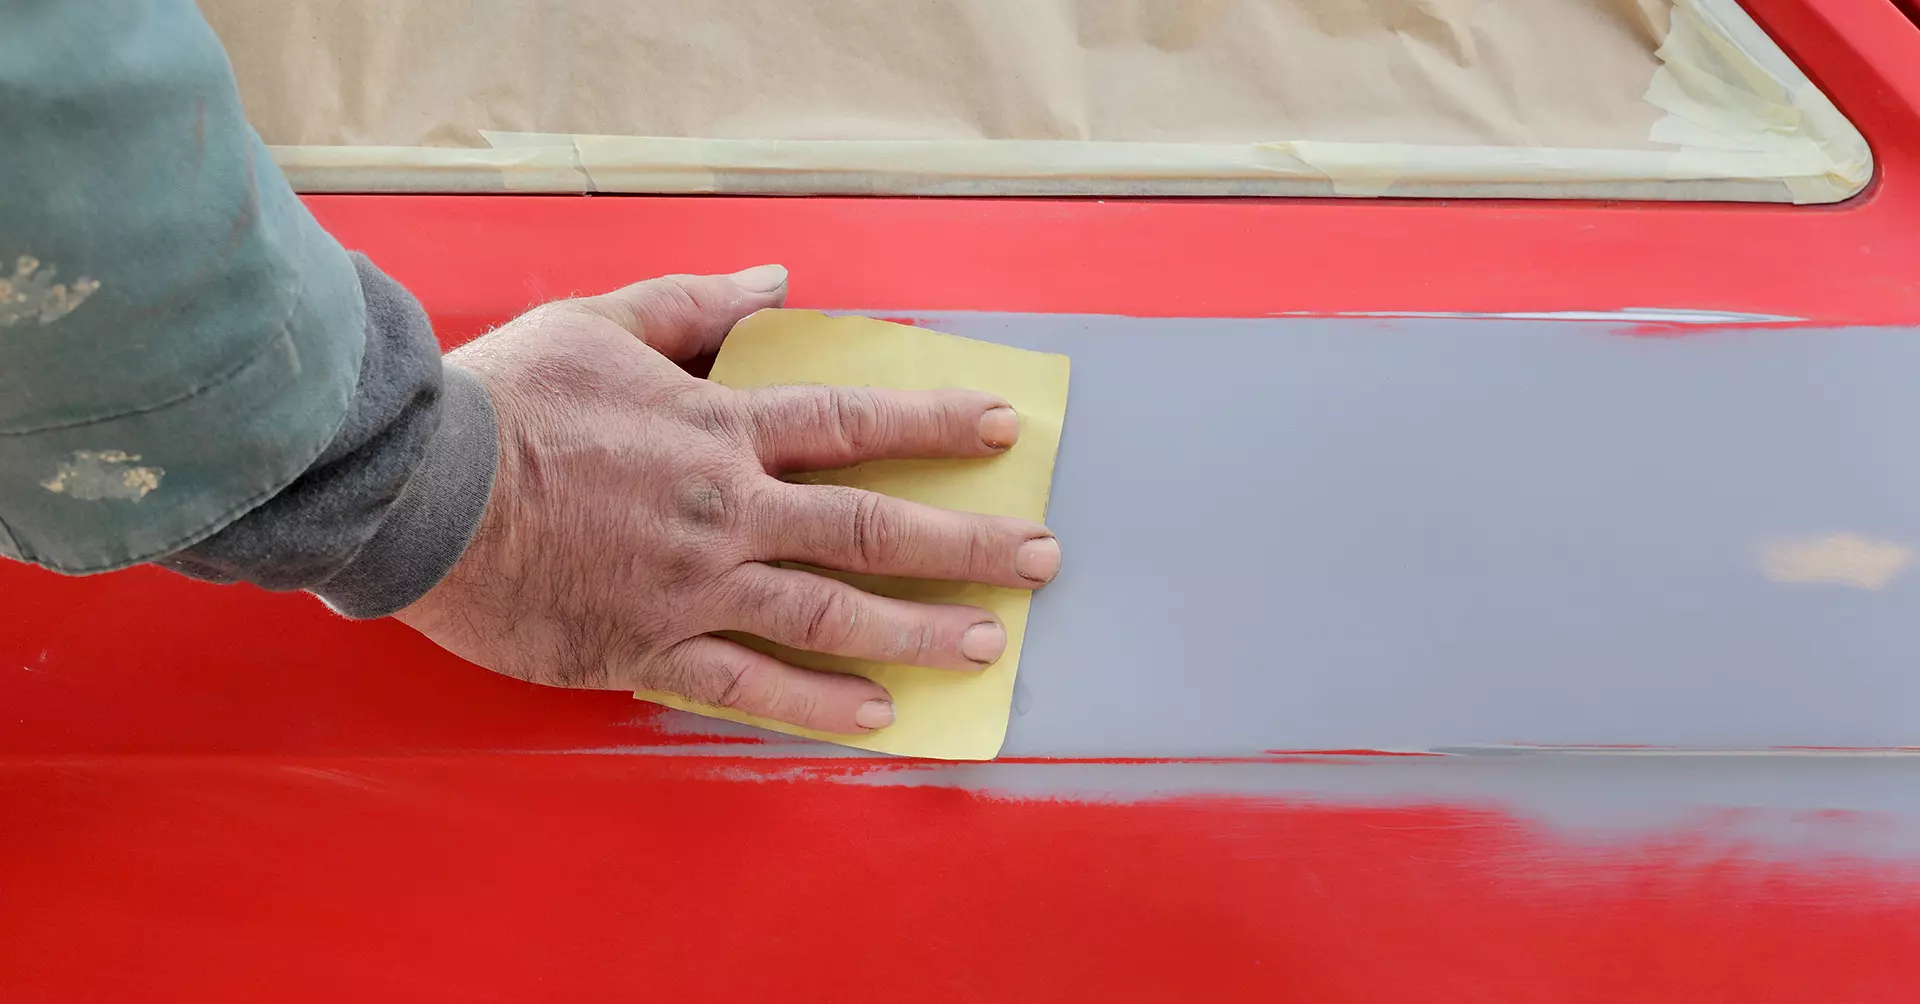 How to remove damaged clear coat without affecting the underlying